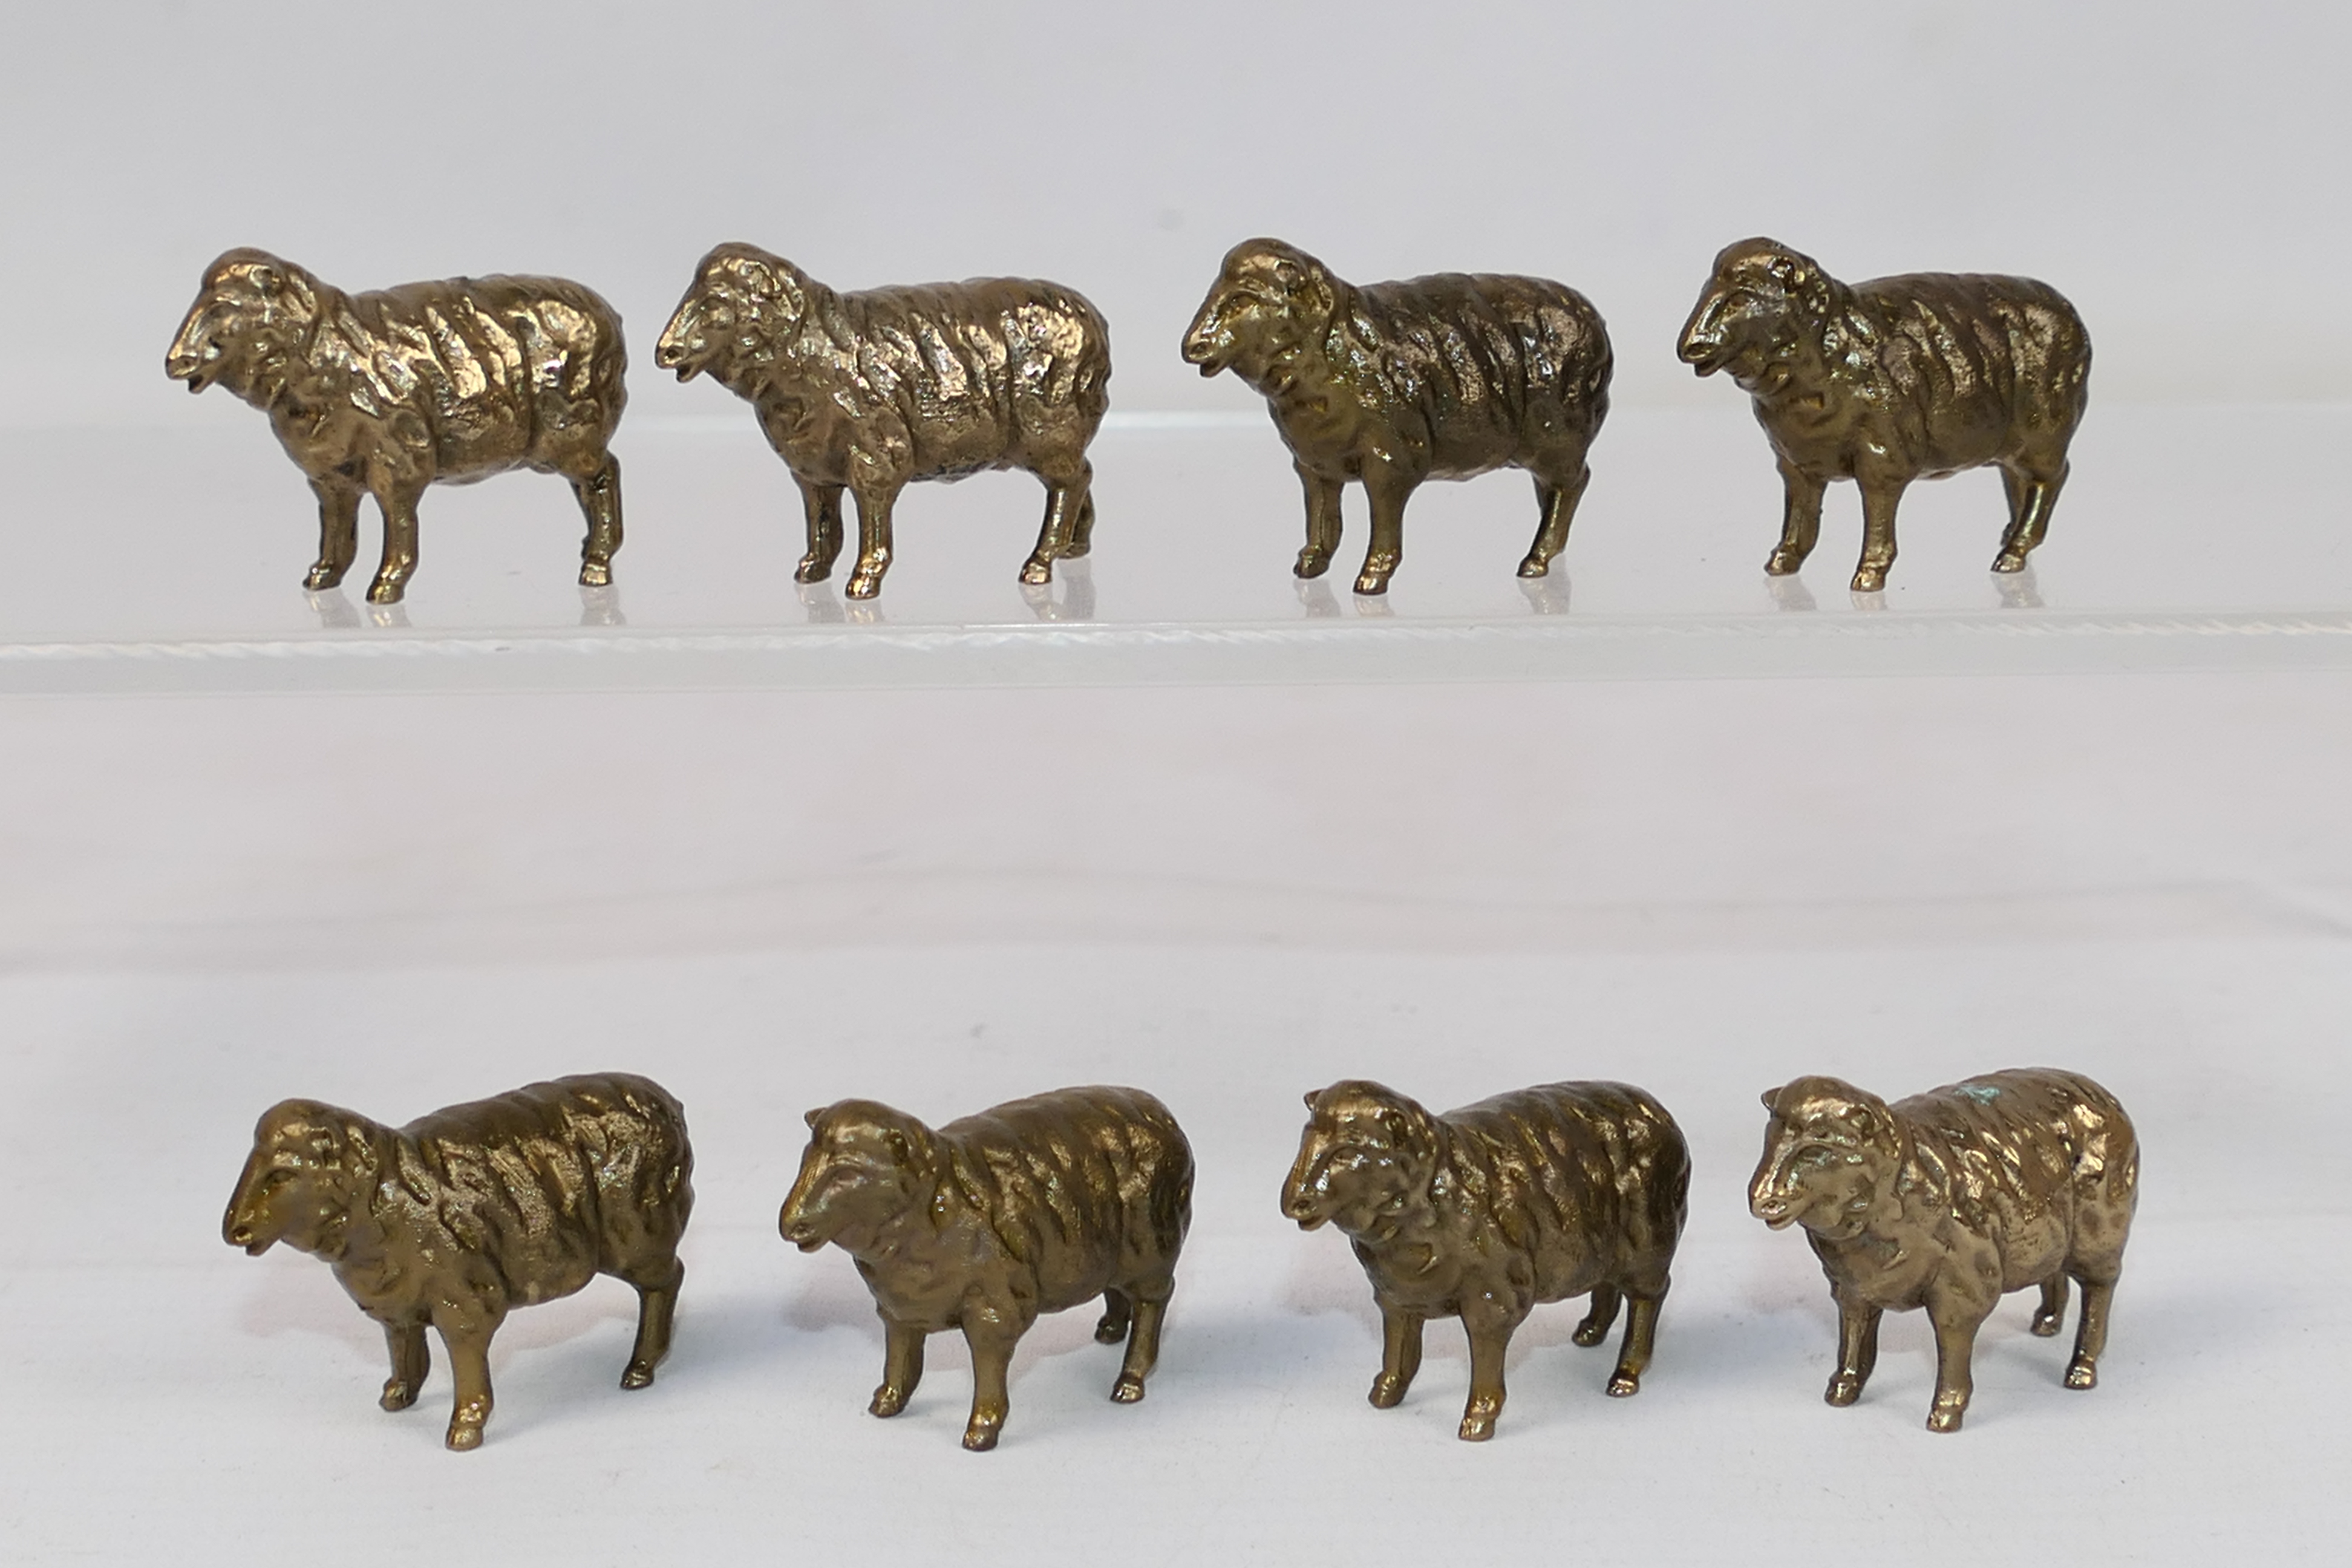 8 x bronze sheep figures. All in same si